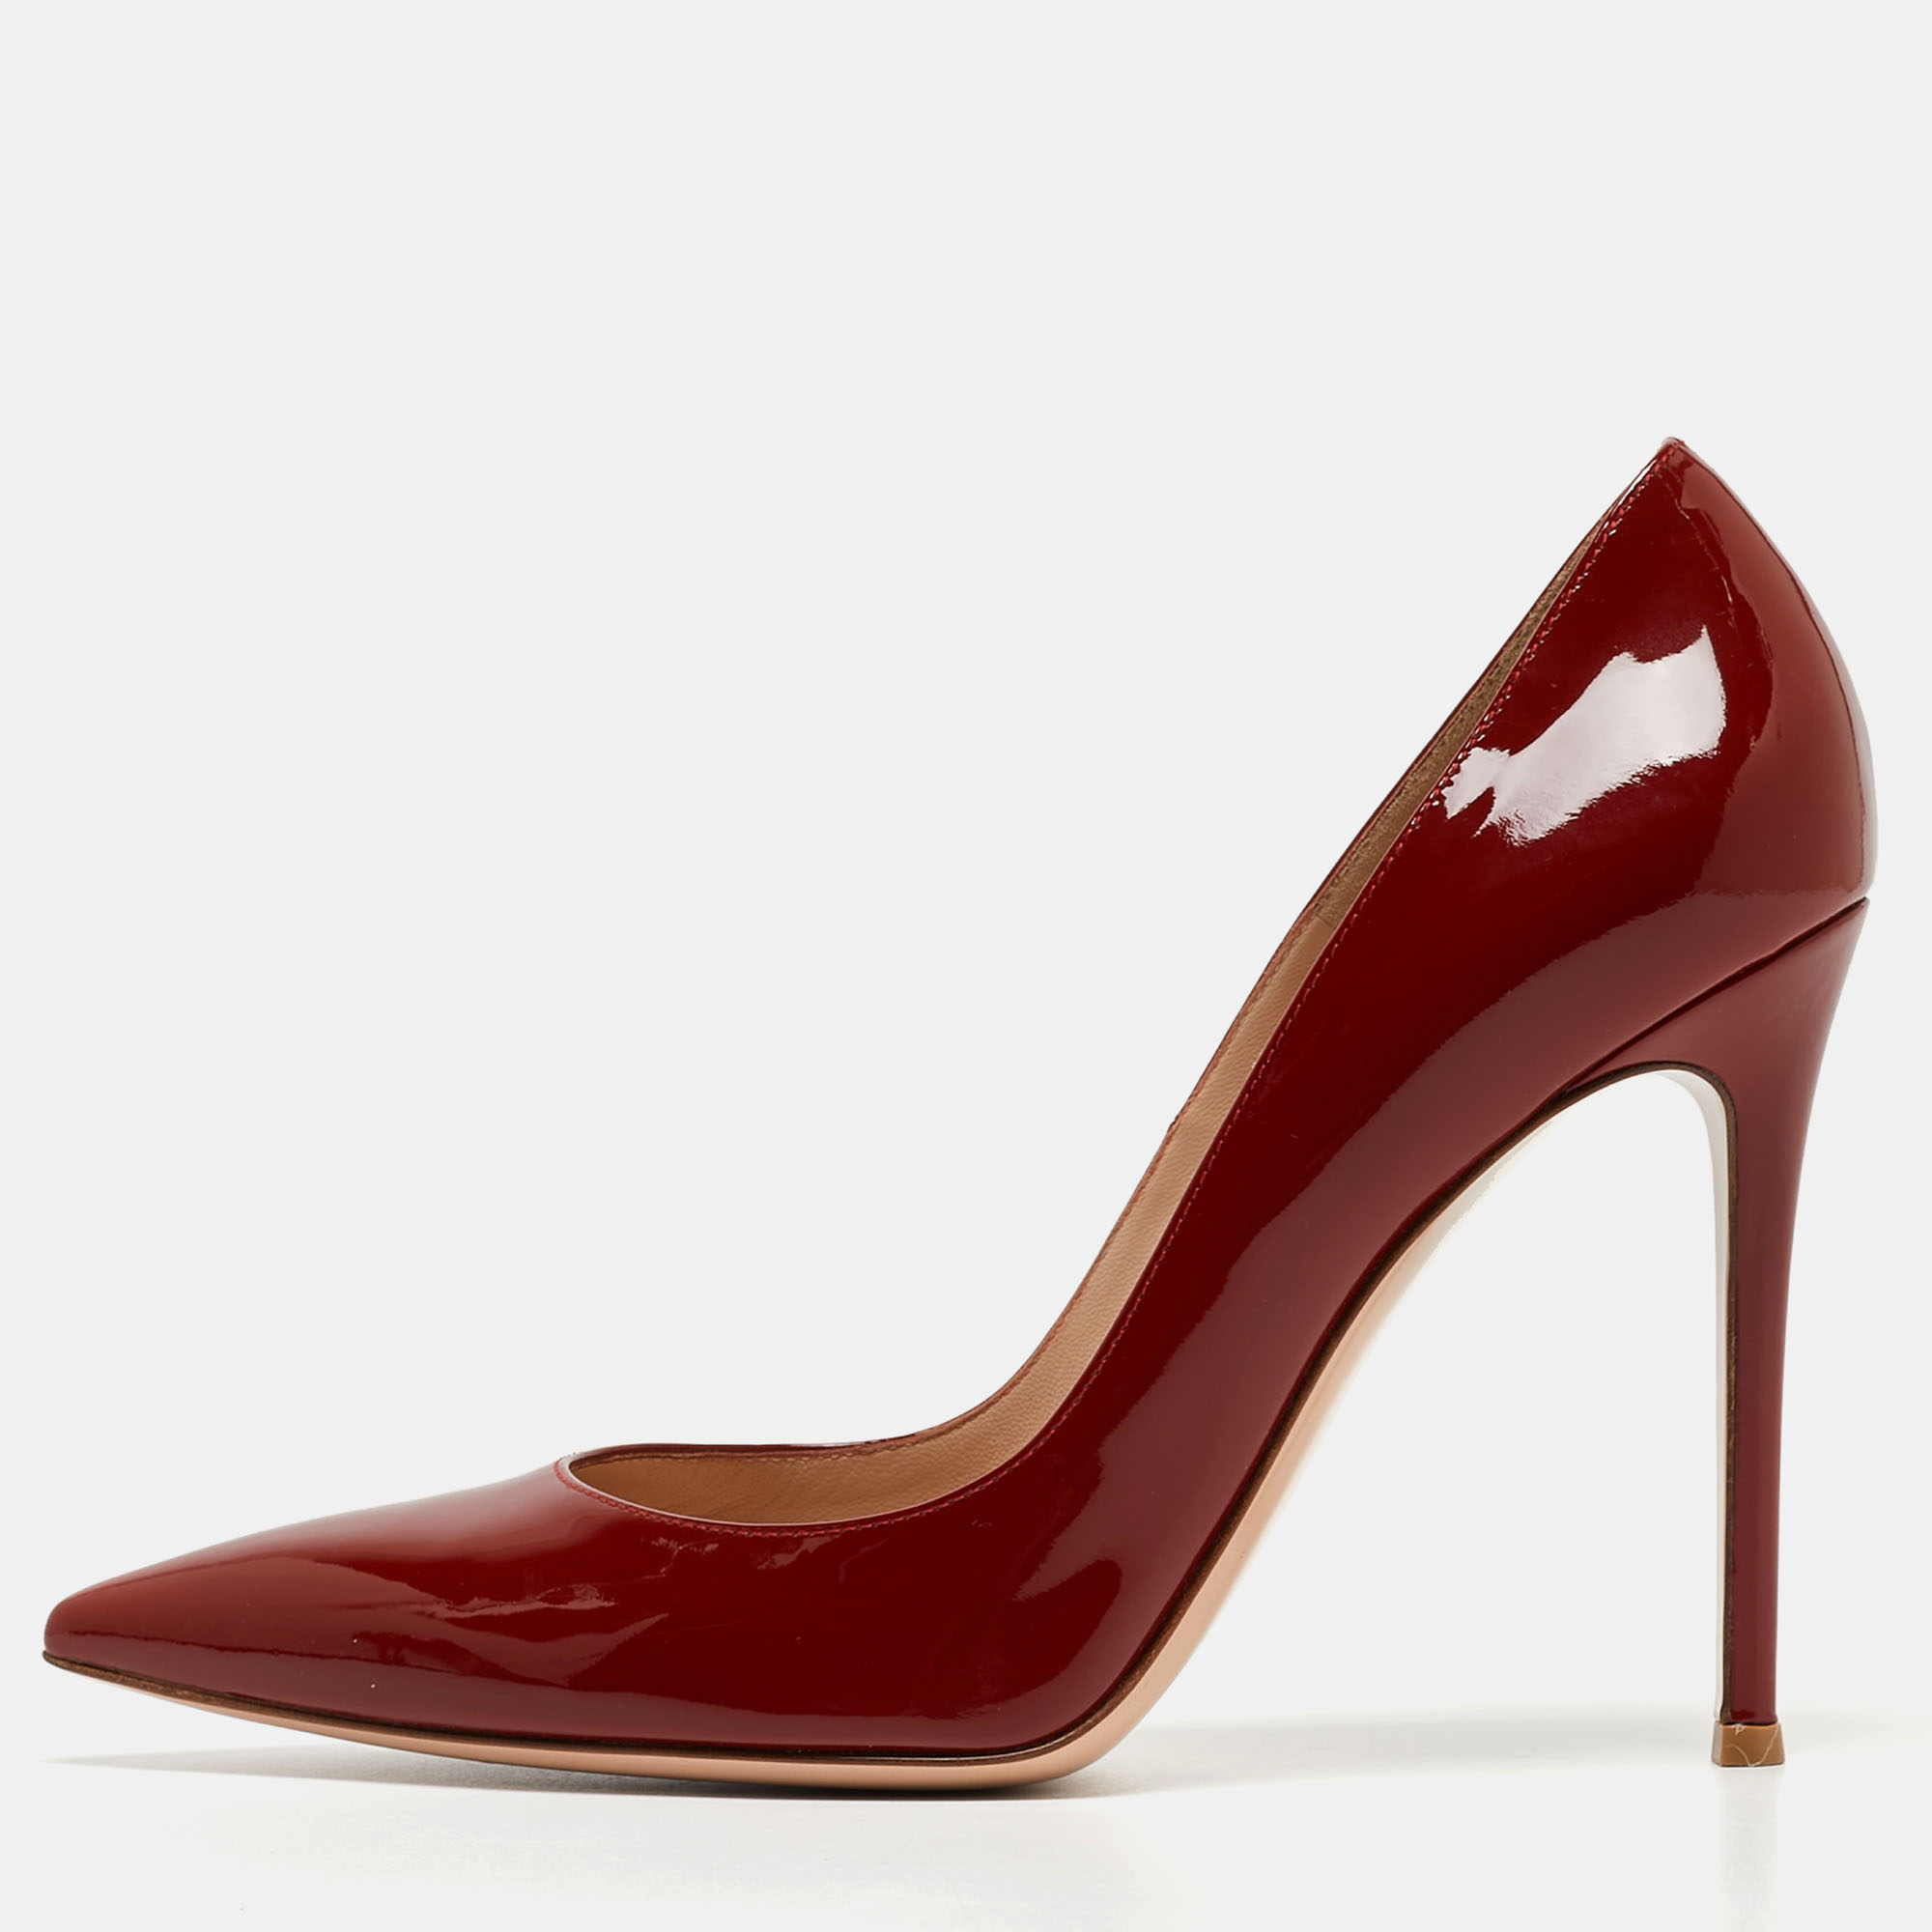 Gianvito rossi dark red patent leather pointed toe pumps size 41